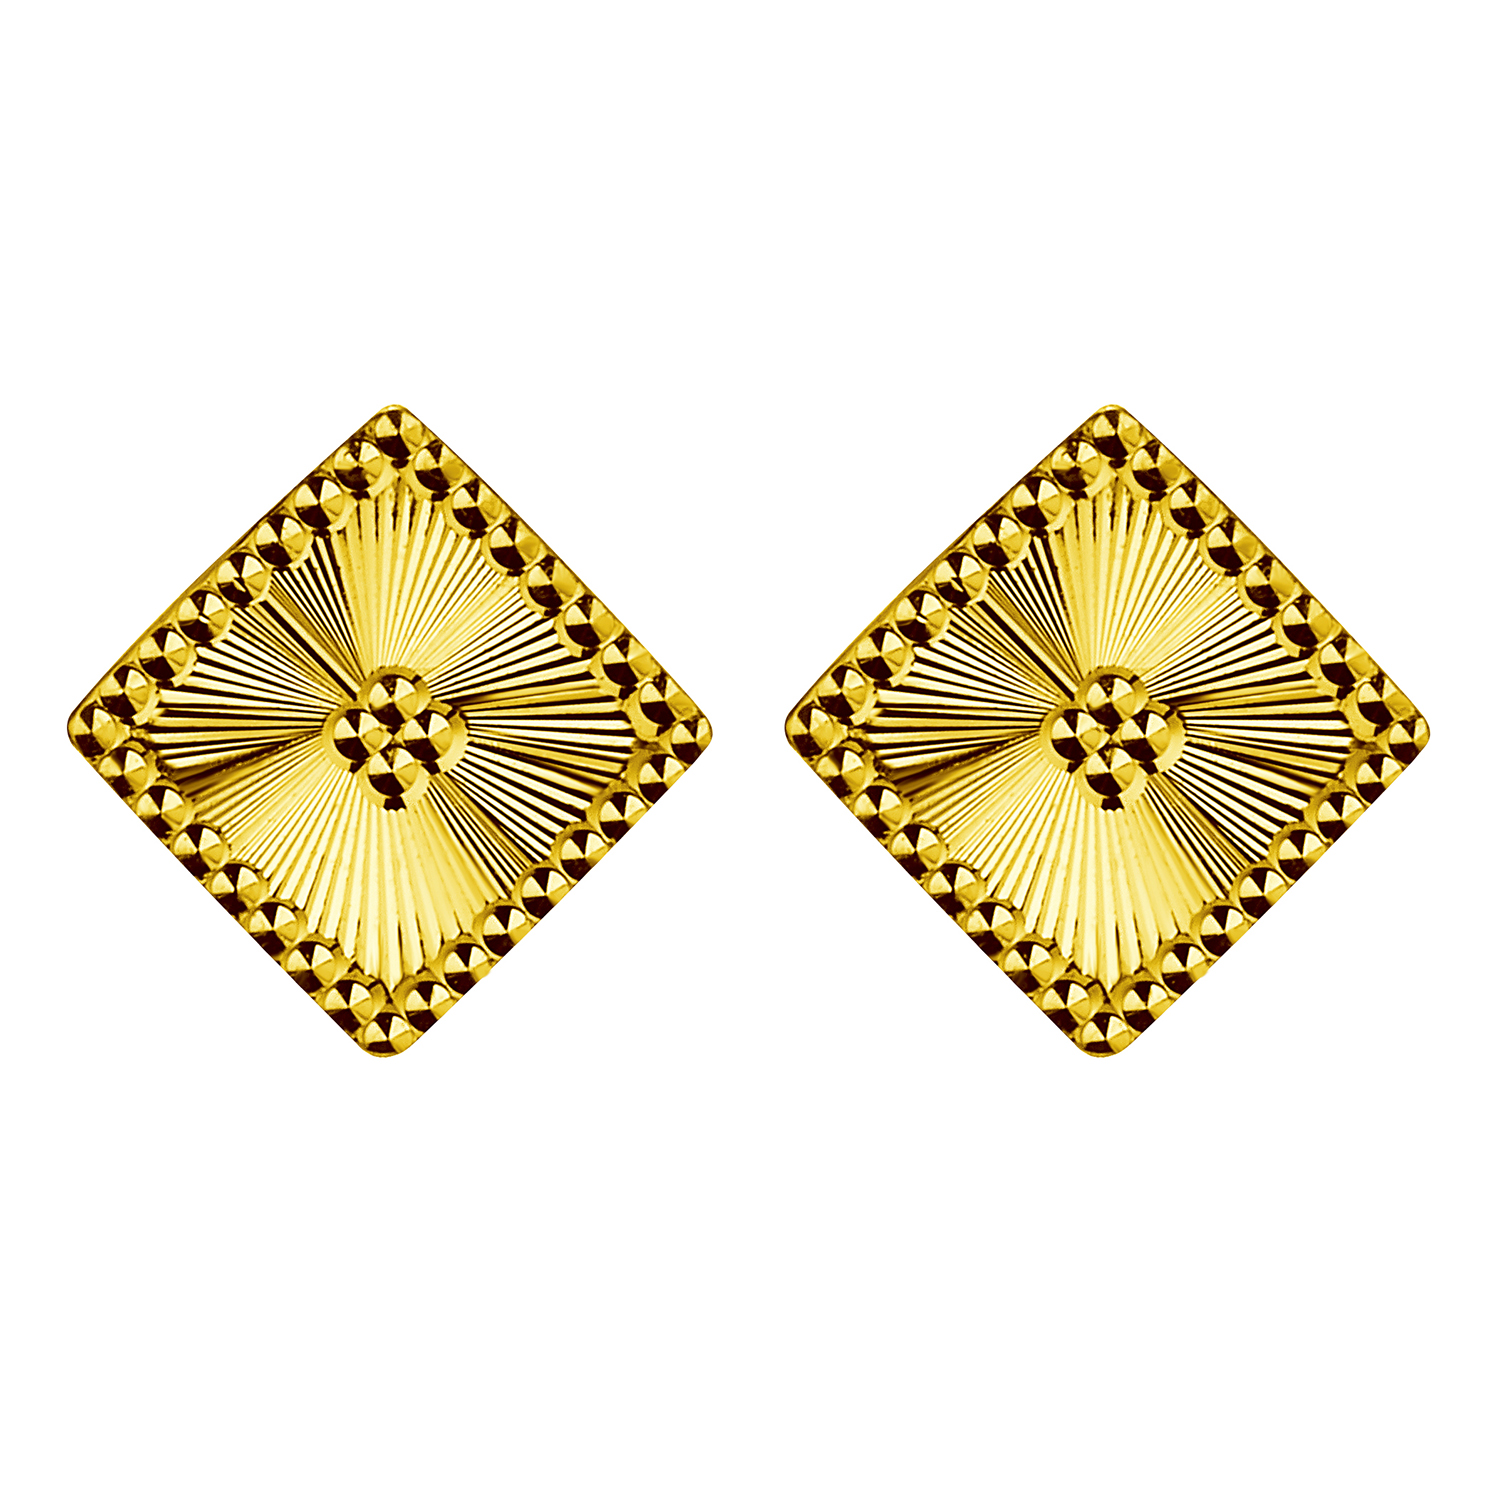 Goldstyle “Game of Life” Square Earrings